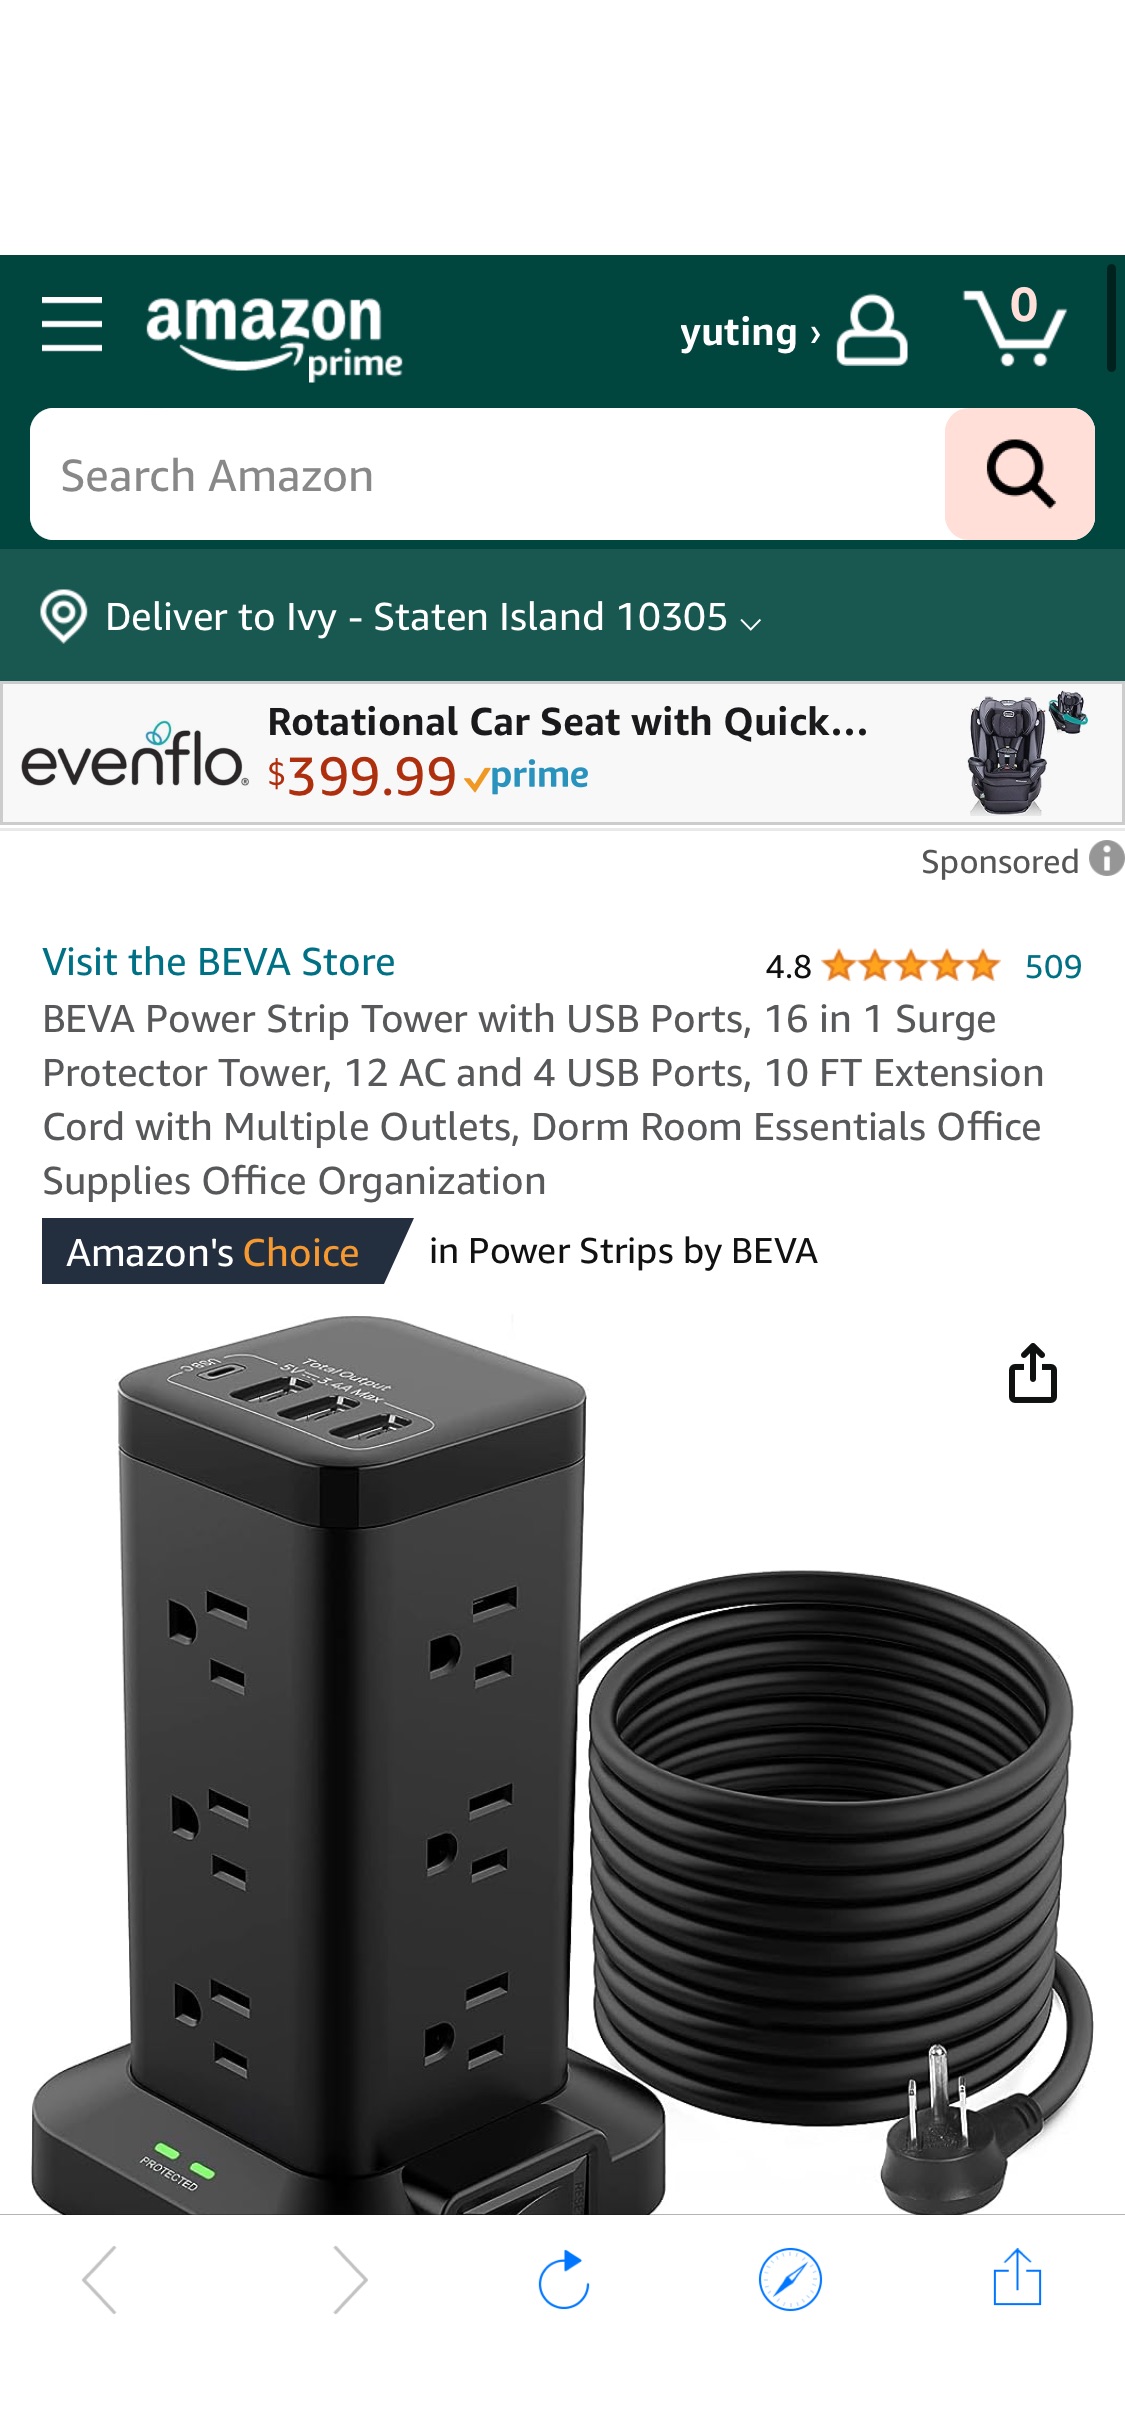 Amazon.com: BEVA Power Strip Tower with USB Ports, 16 in 1 Surge Protector Tower, 12 AC and 4 USB Ports, 10 FT Extension Cord with Multiple Outlets, Dorm Room Essentials Office Supplies Office Organiz